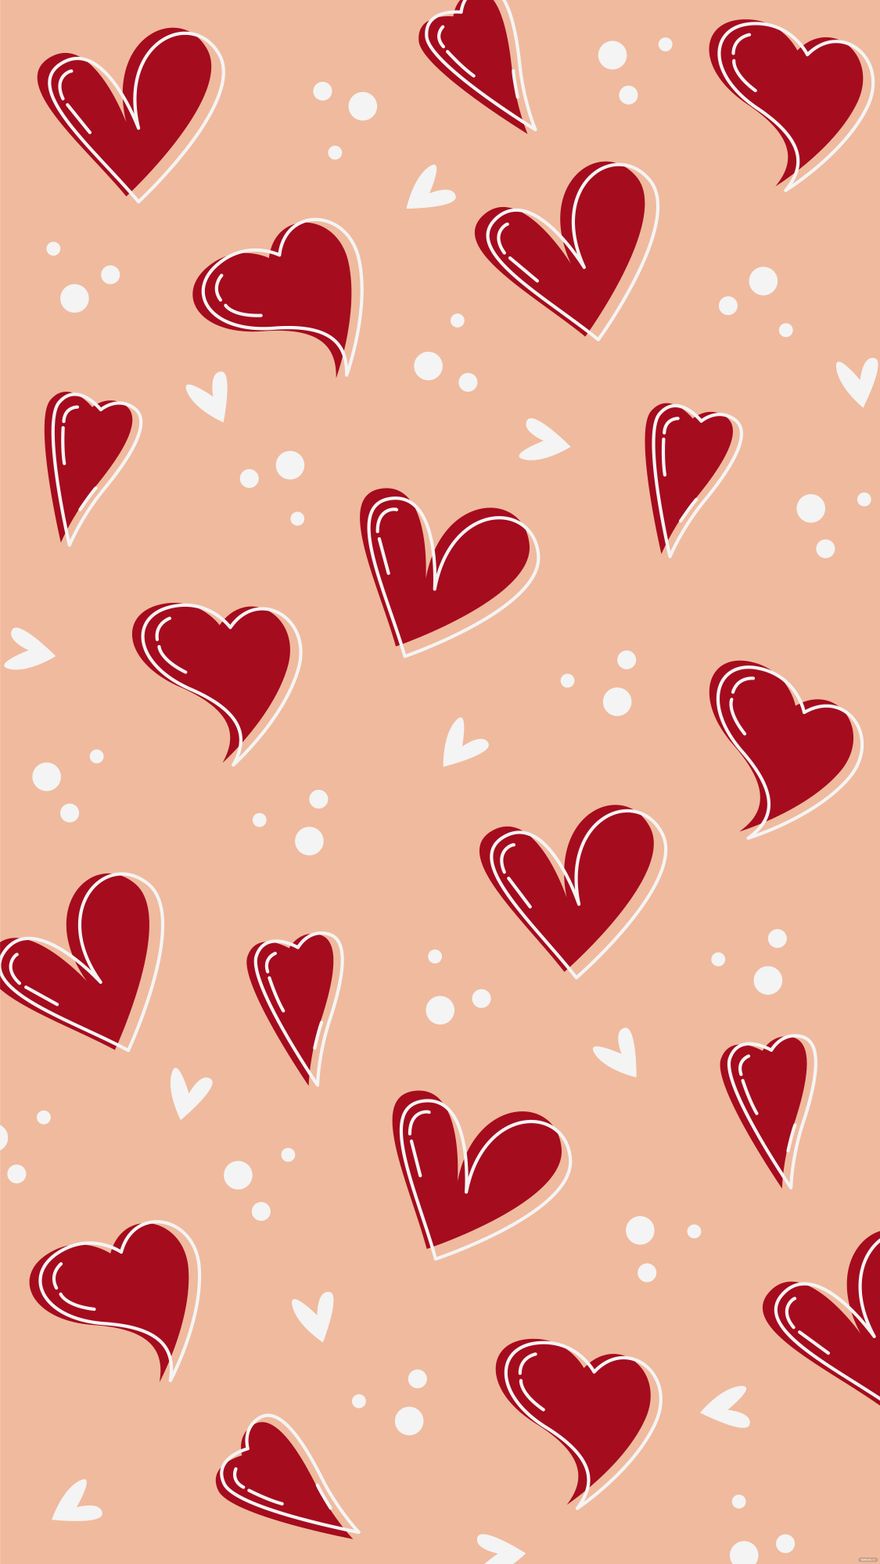 Free Red And White Heart Background in Illustrator, EPS, SVG, JPG